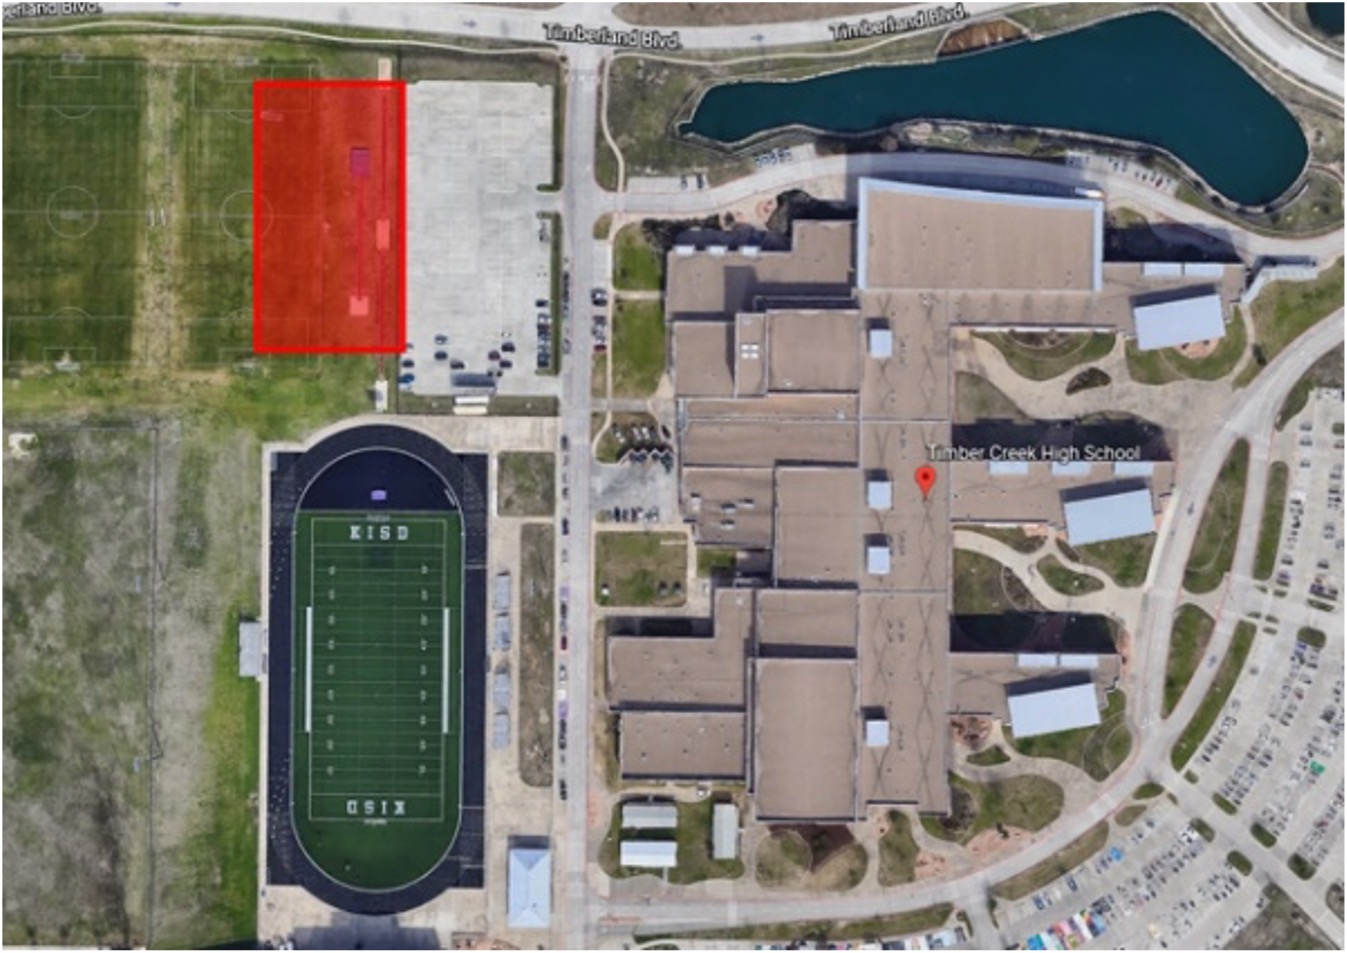 Site plan for indoor extracurricular facility